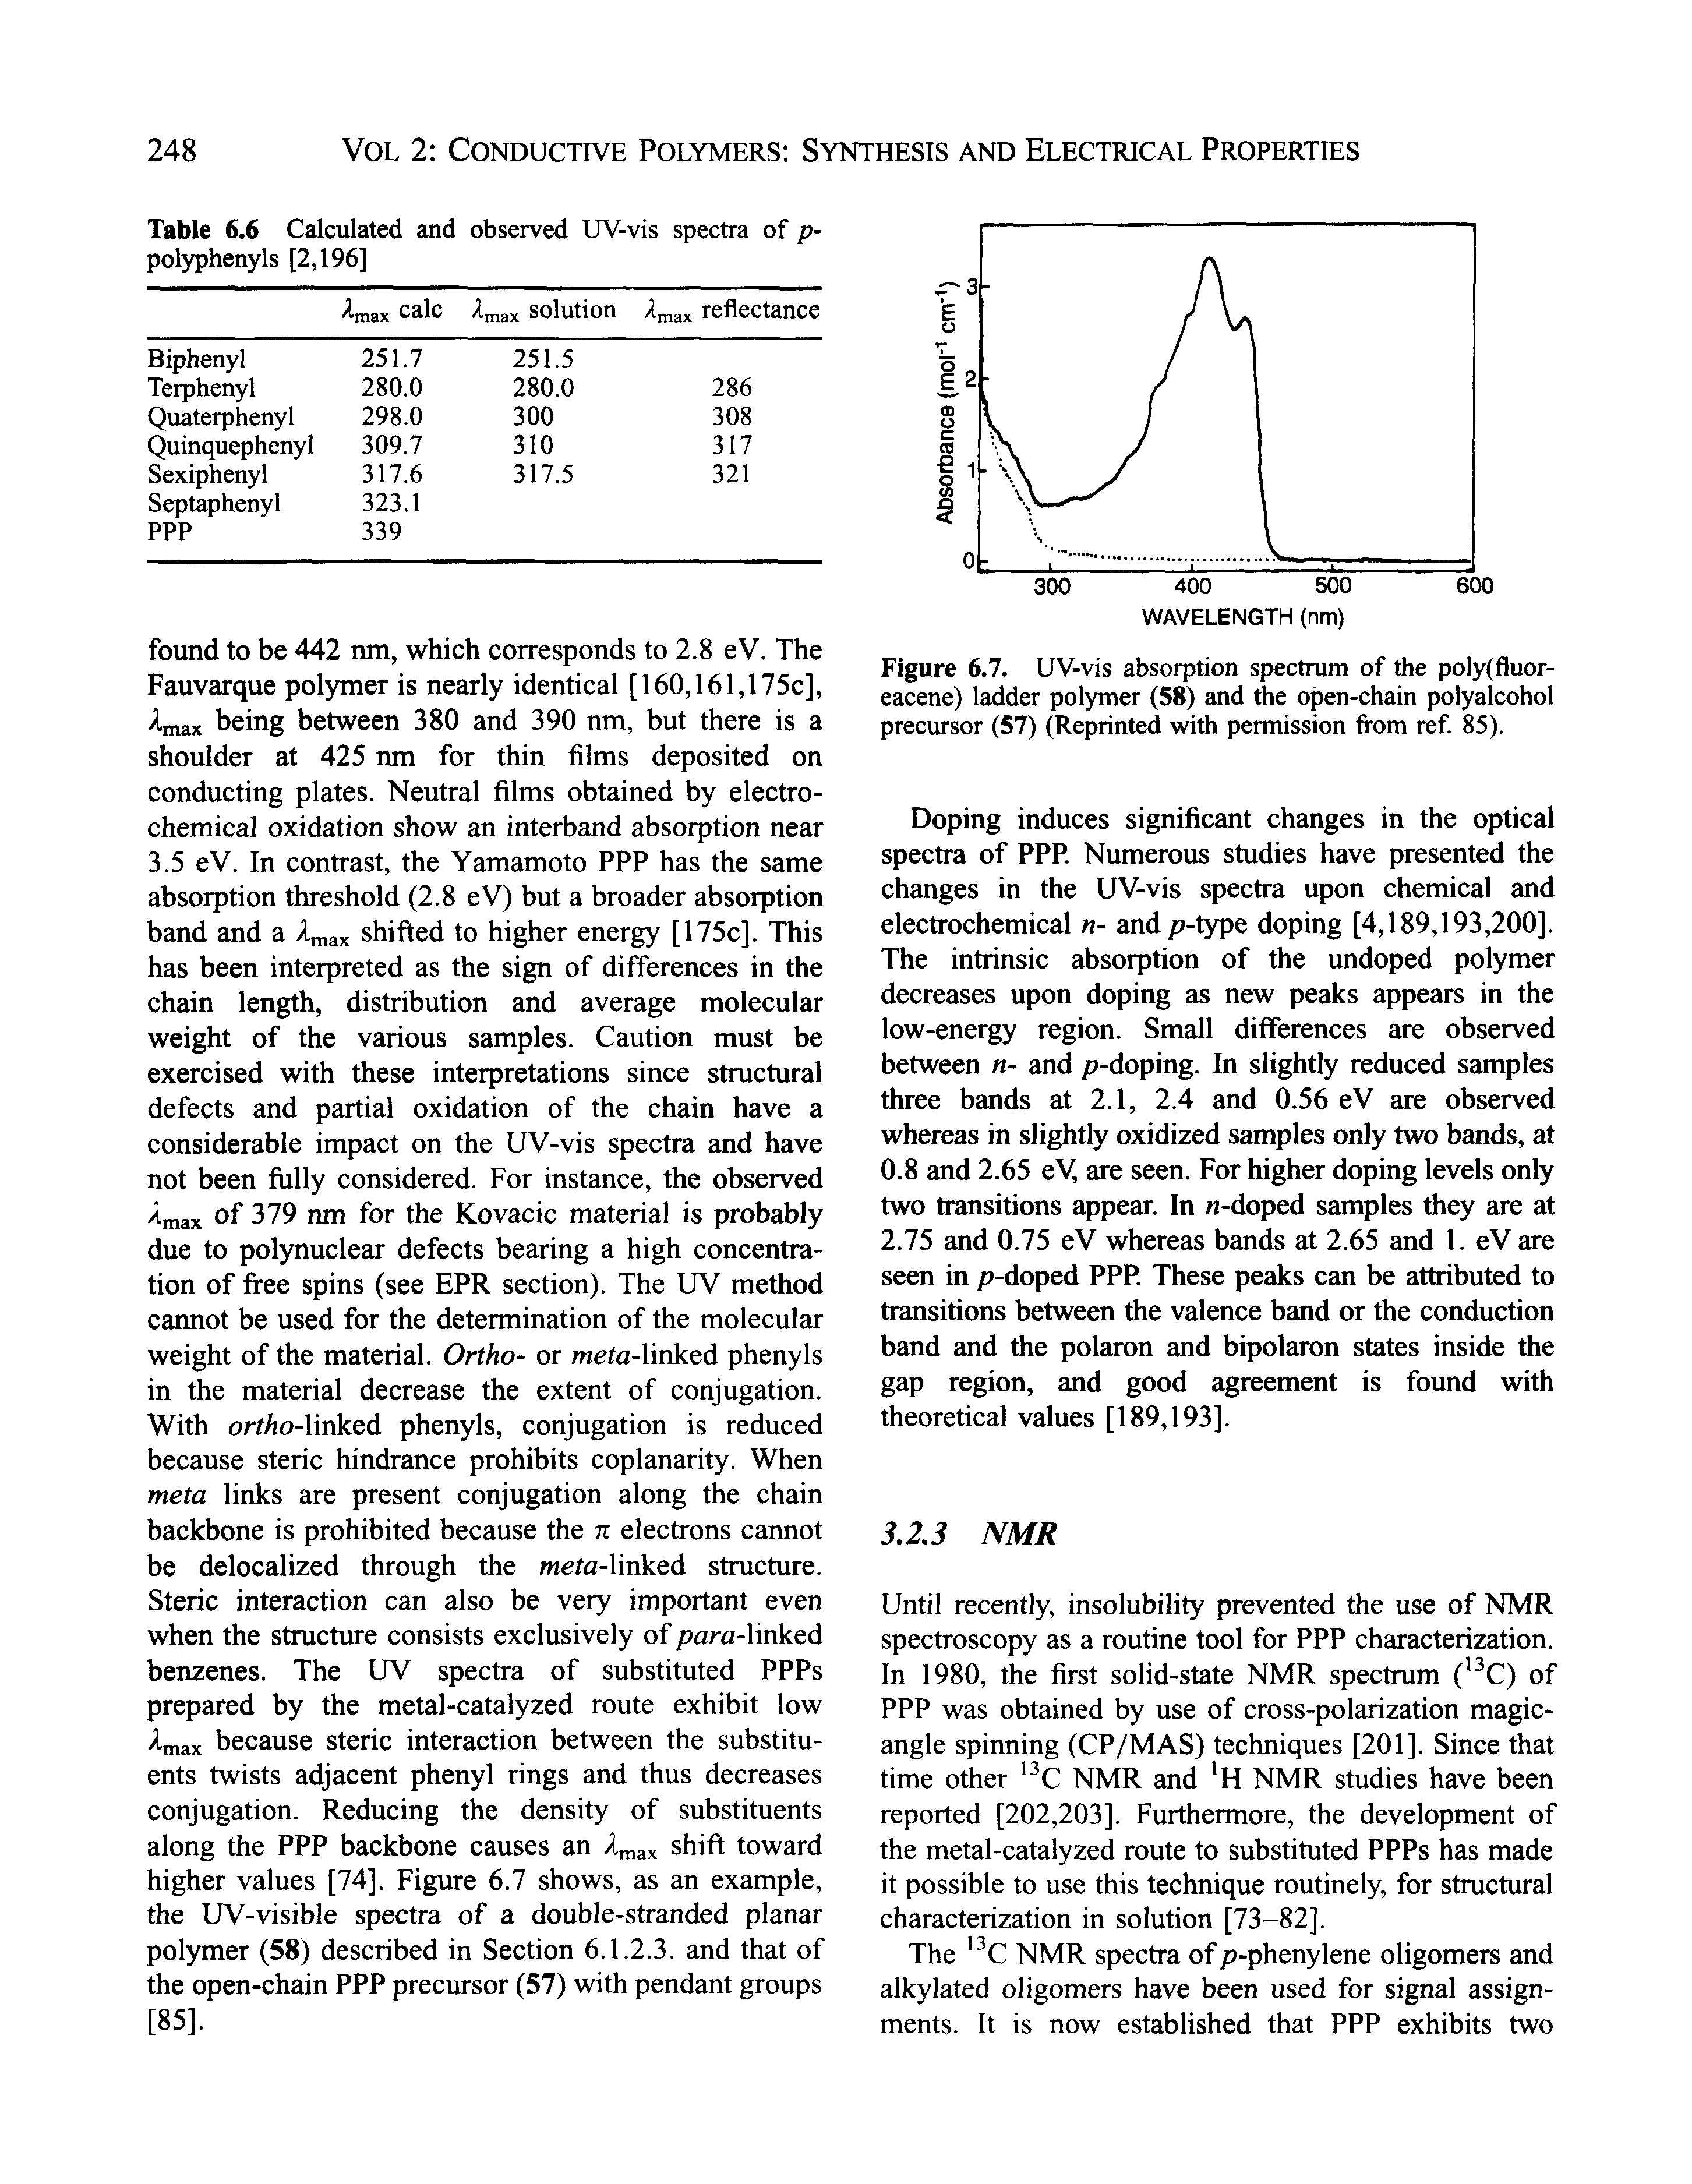 Figure 6.7. UV-vis absorption spectrum of the poly(fluor-eacene) ladder polymer (58) and the open-chain polyalcohol precursor (57) (Reprinted with permission from ref 85).